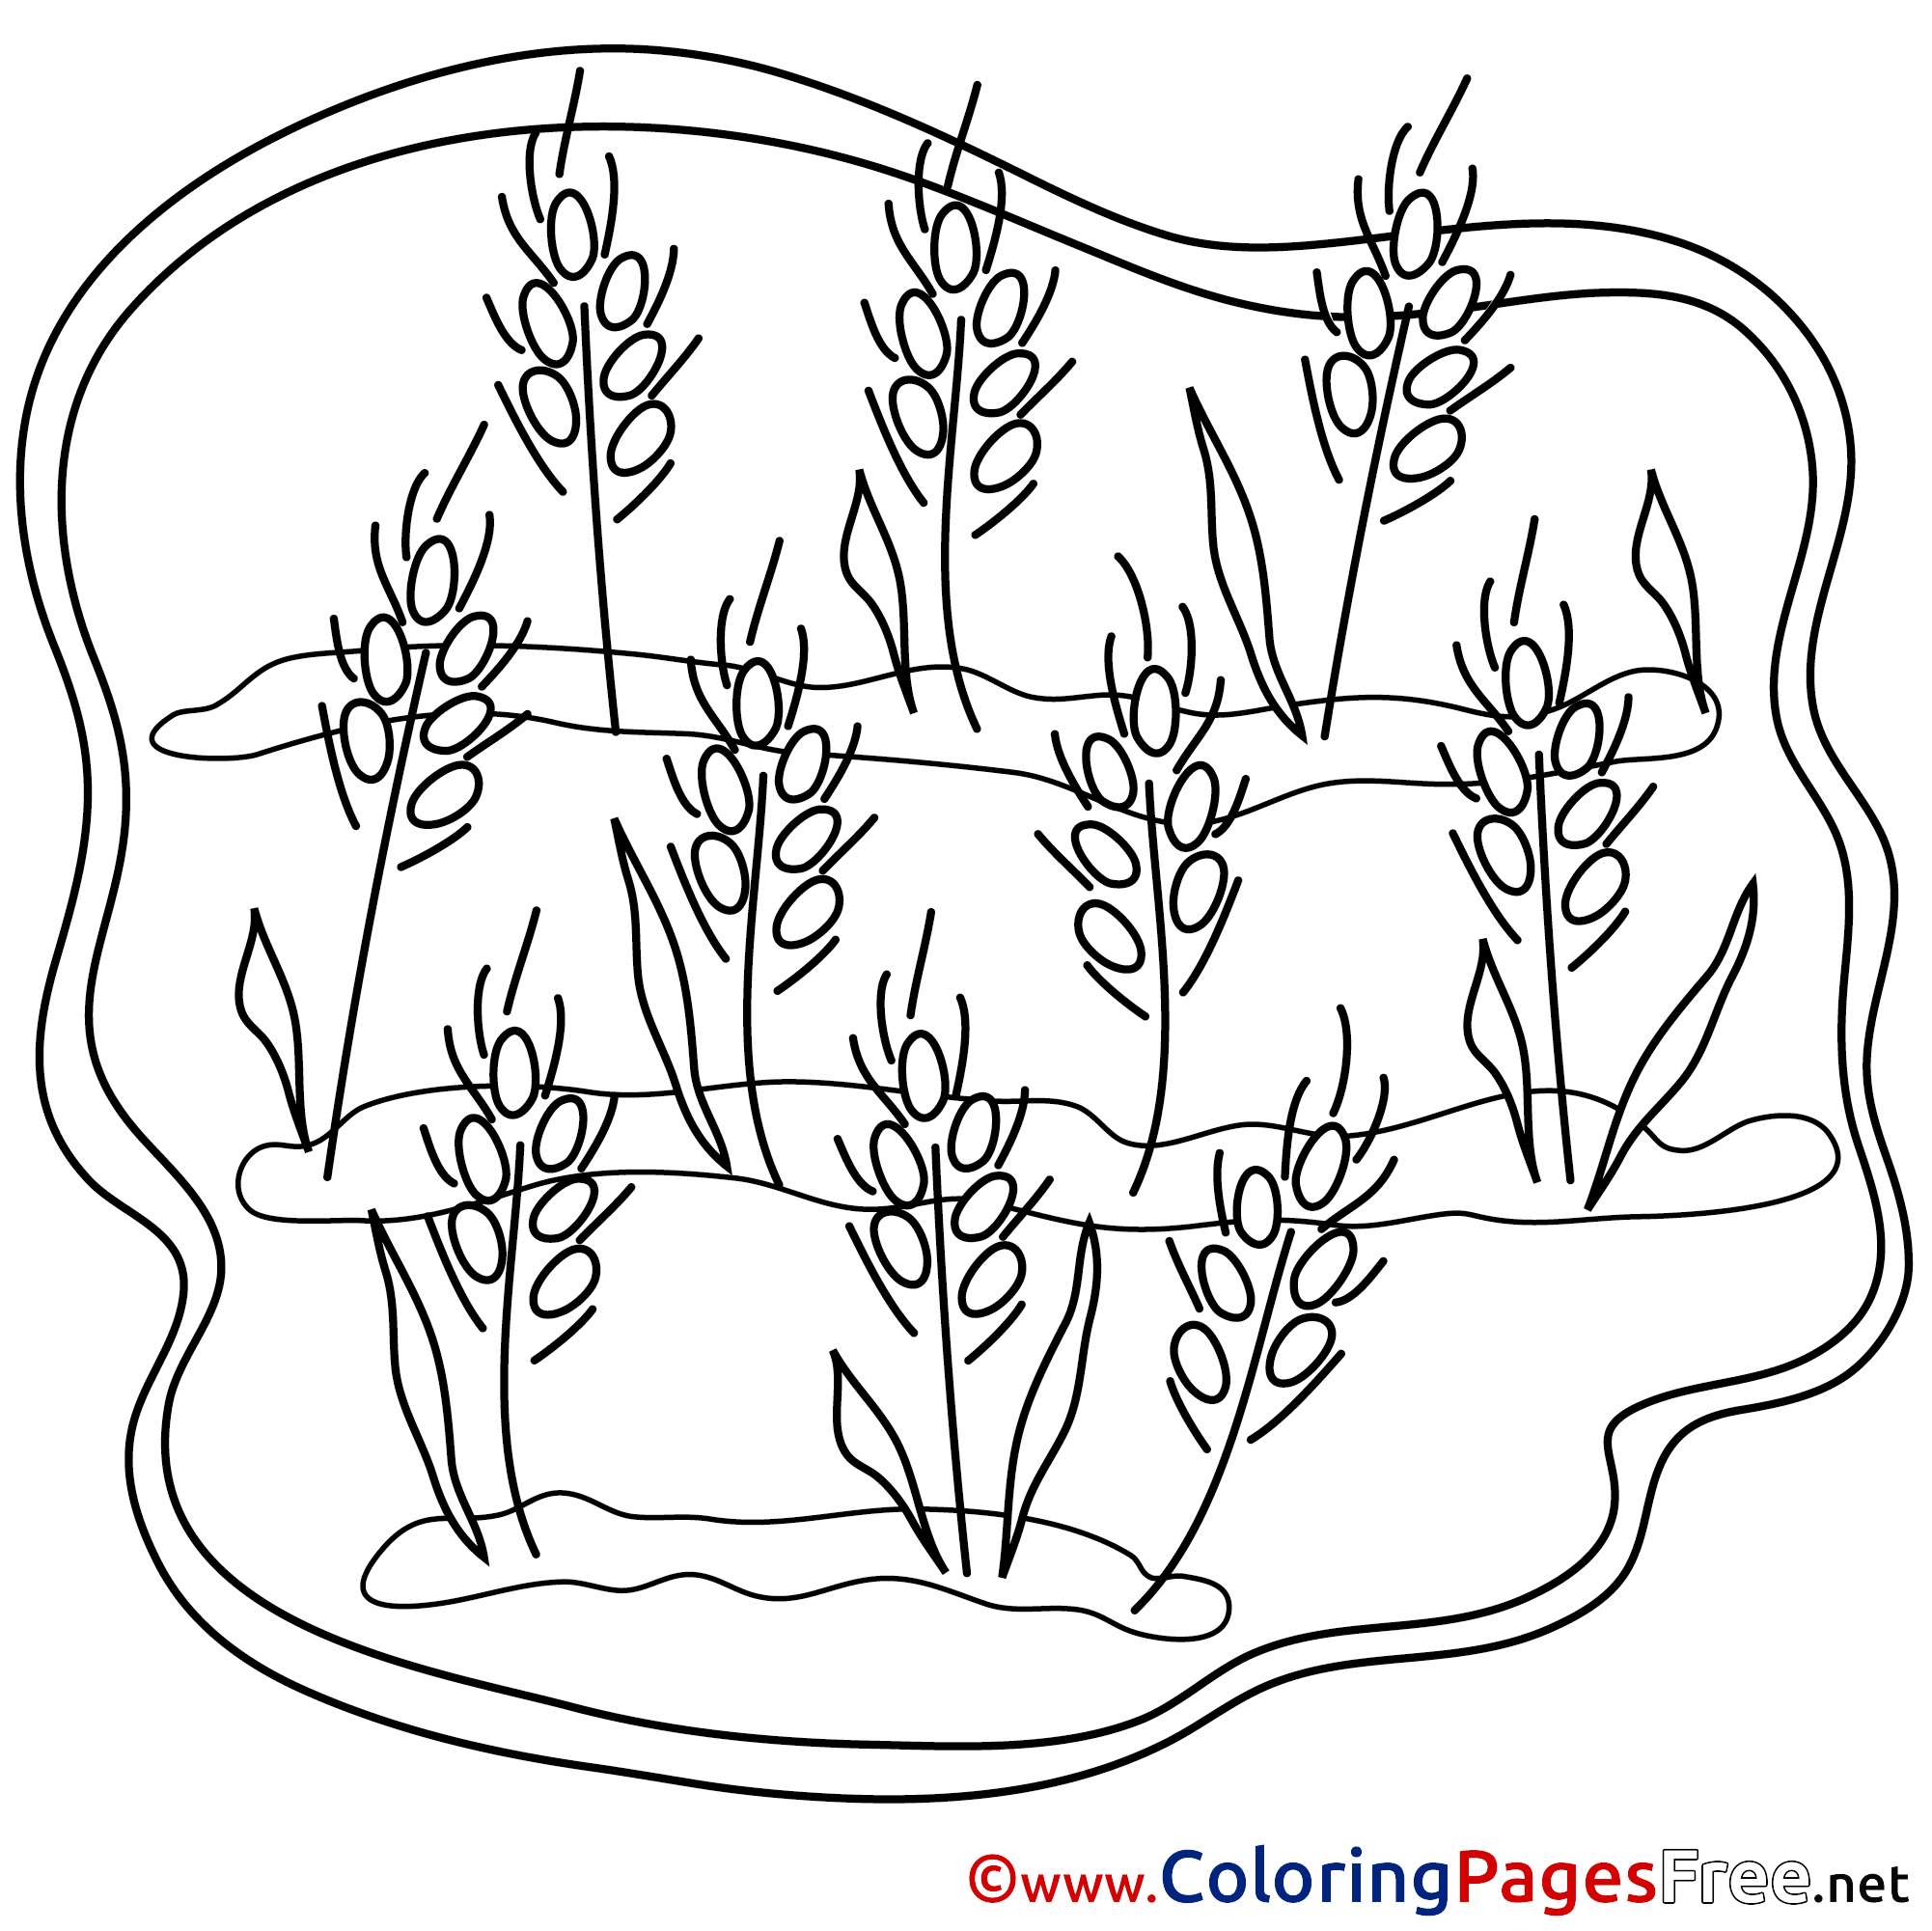 Wheat Children download Colouring Page